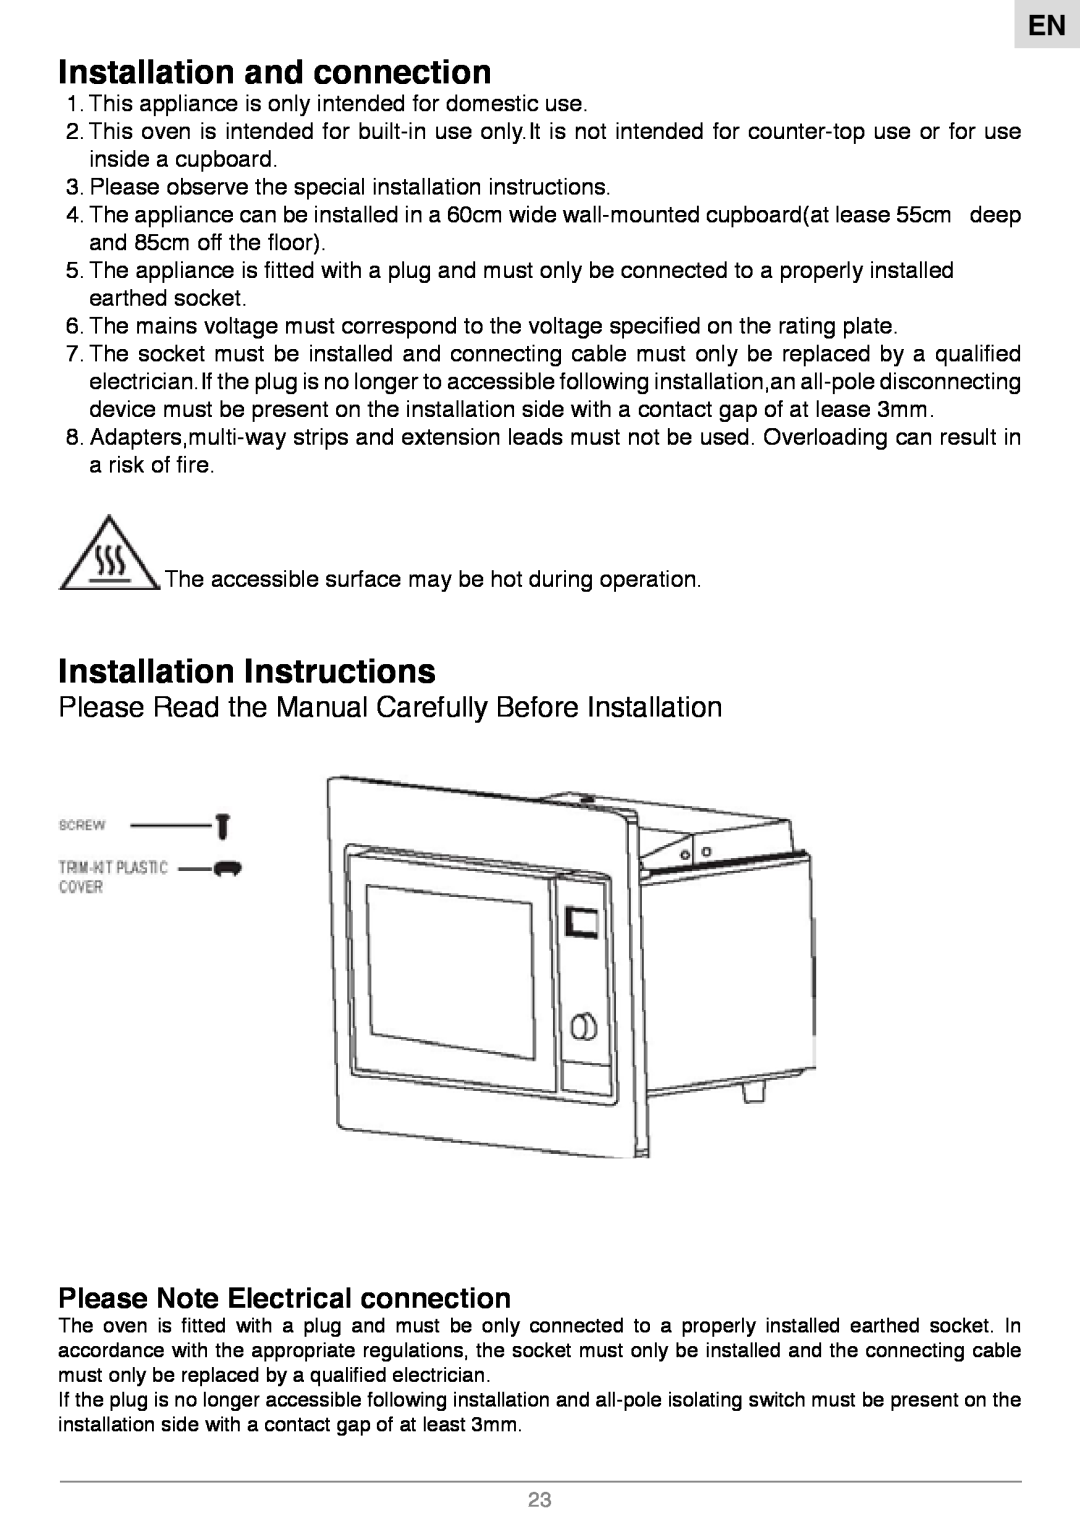 Foster S1000 manual Installation and connection, Installation Instructions, Please Note Electrical connection 